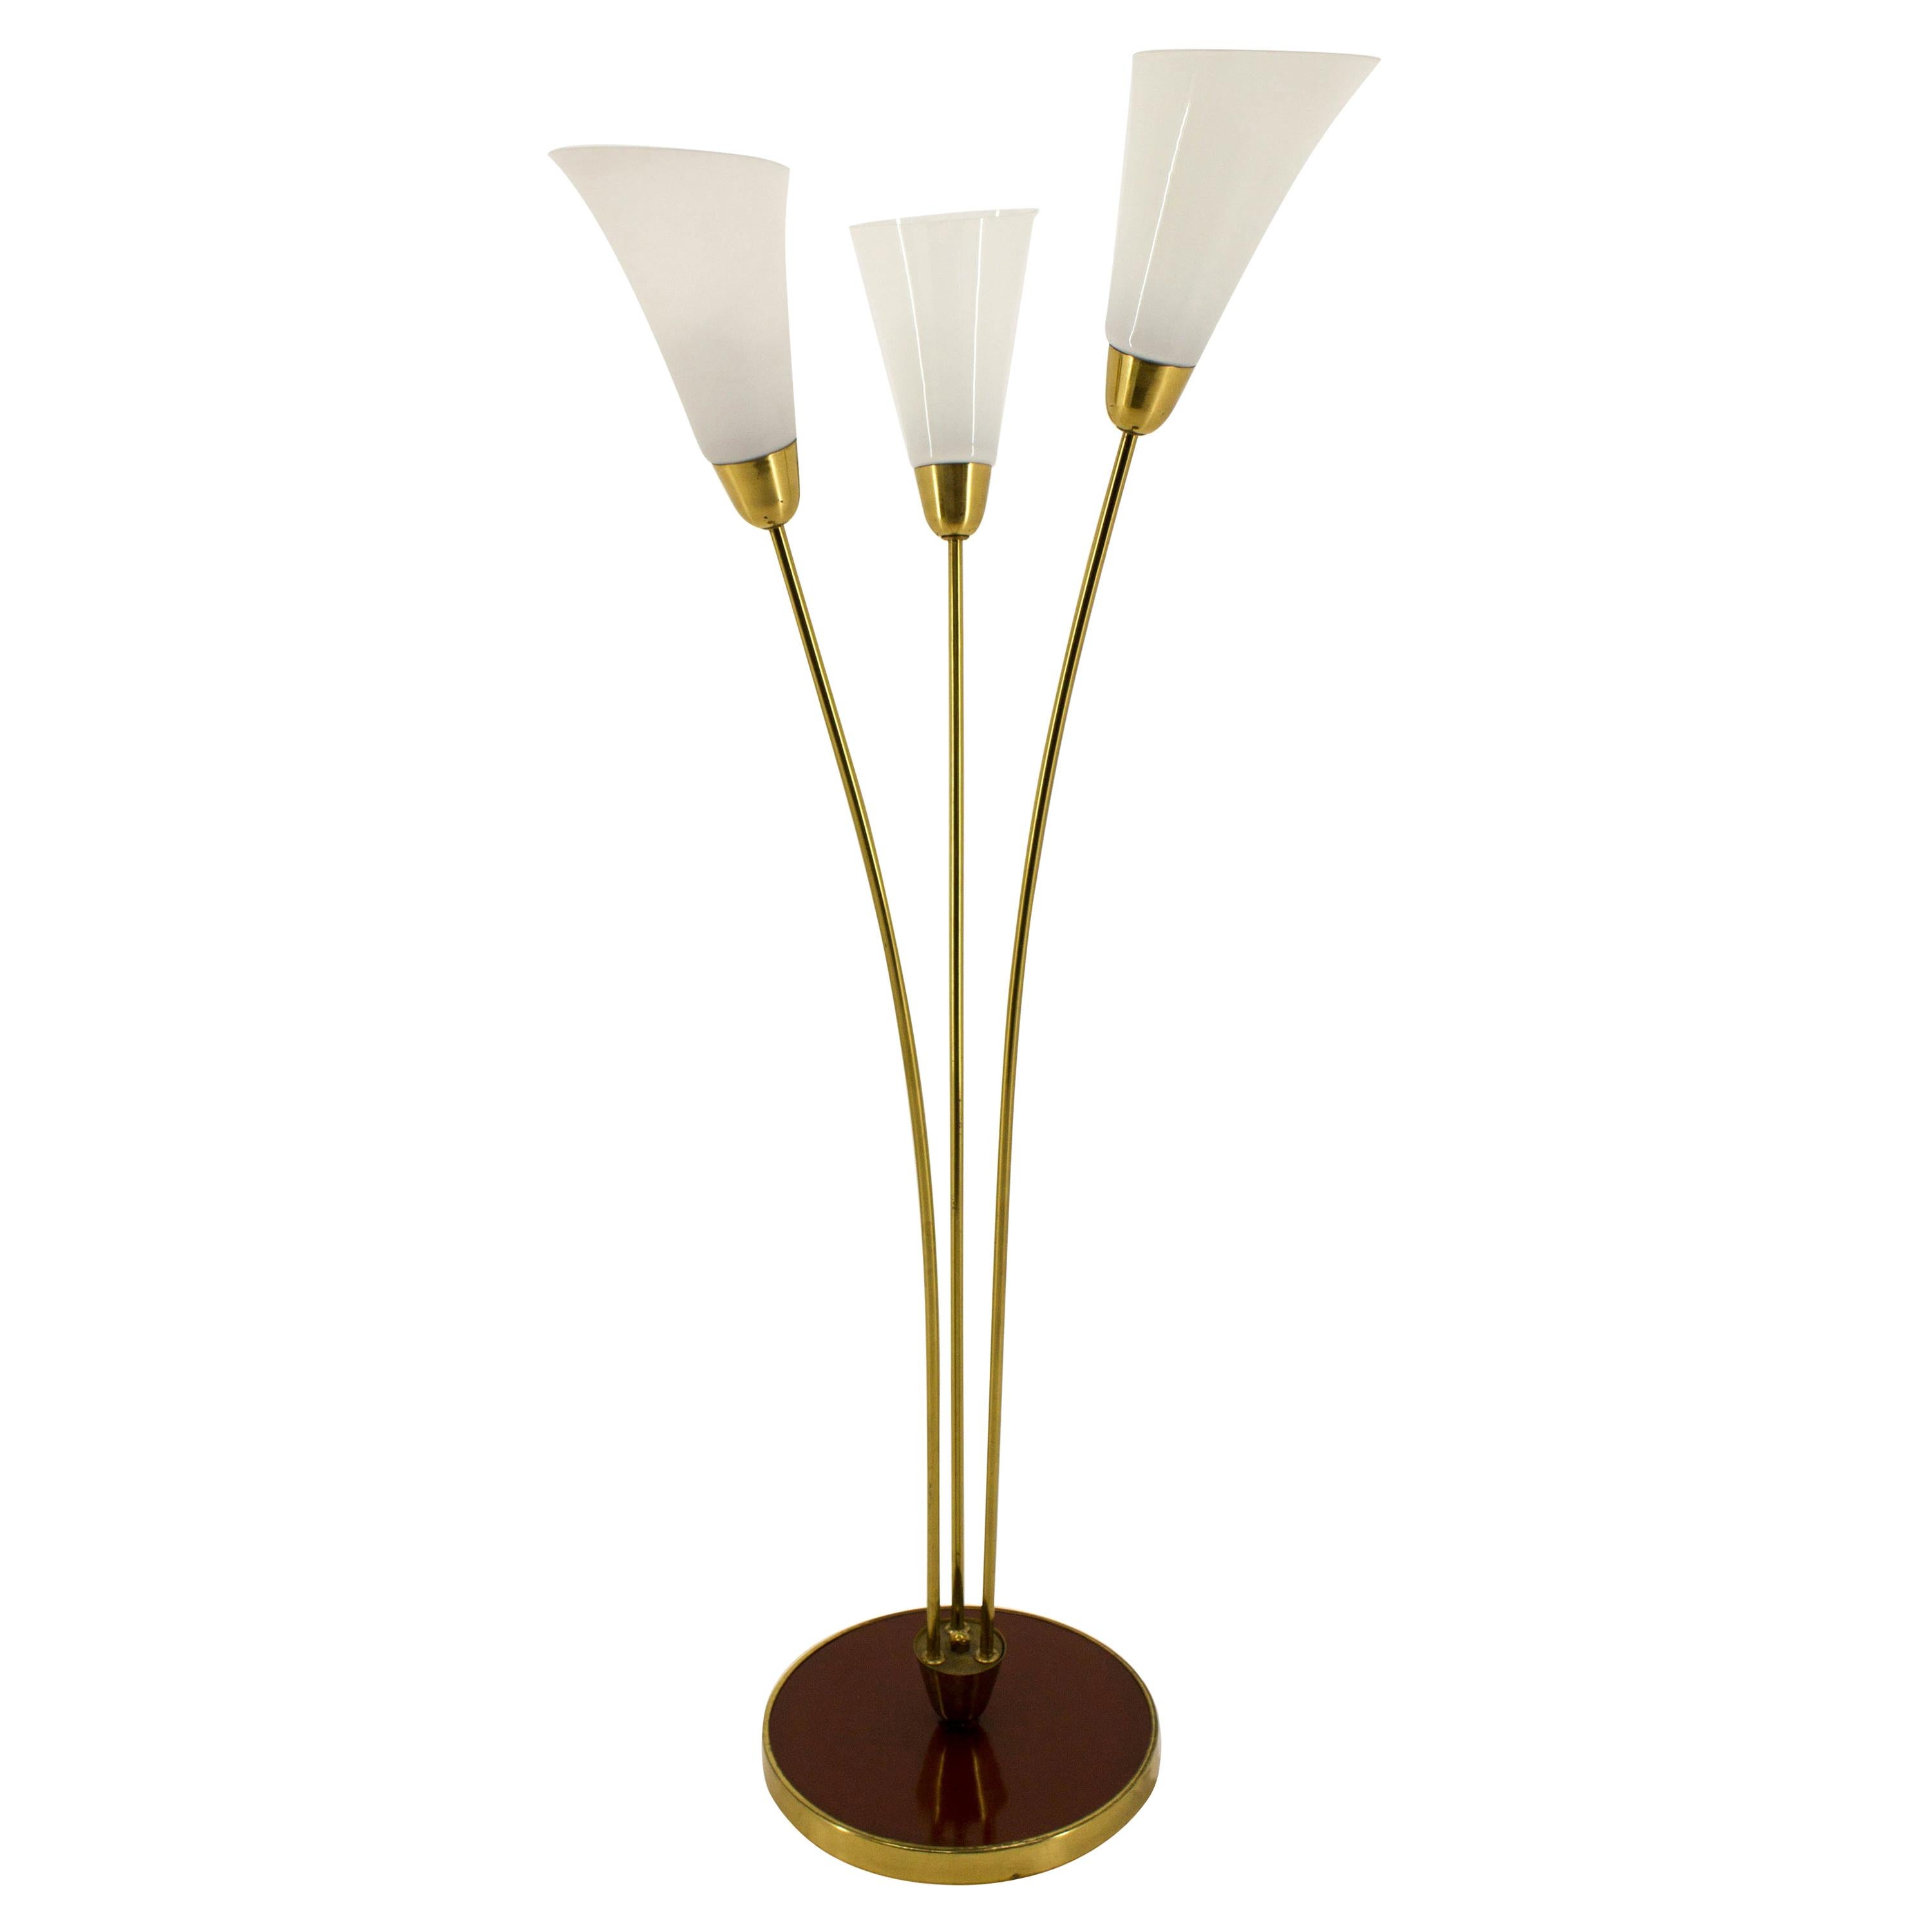 Beautiful Art Deco Brass and Glass Floor Lamp, 1940s For Sale